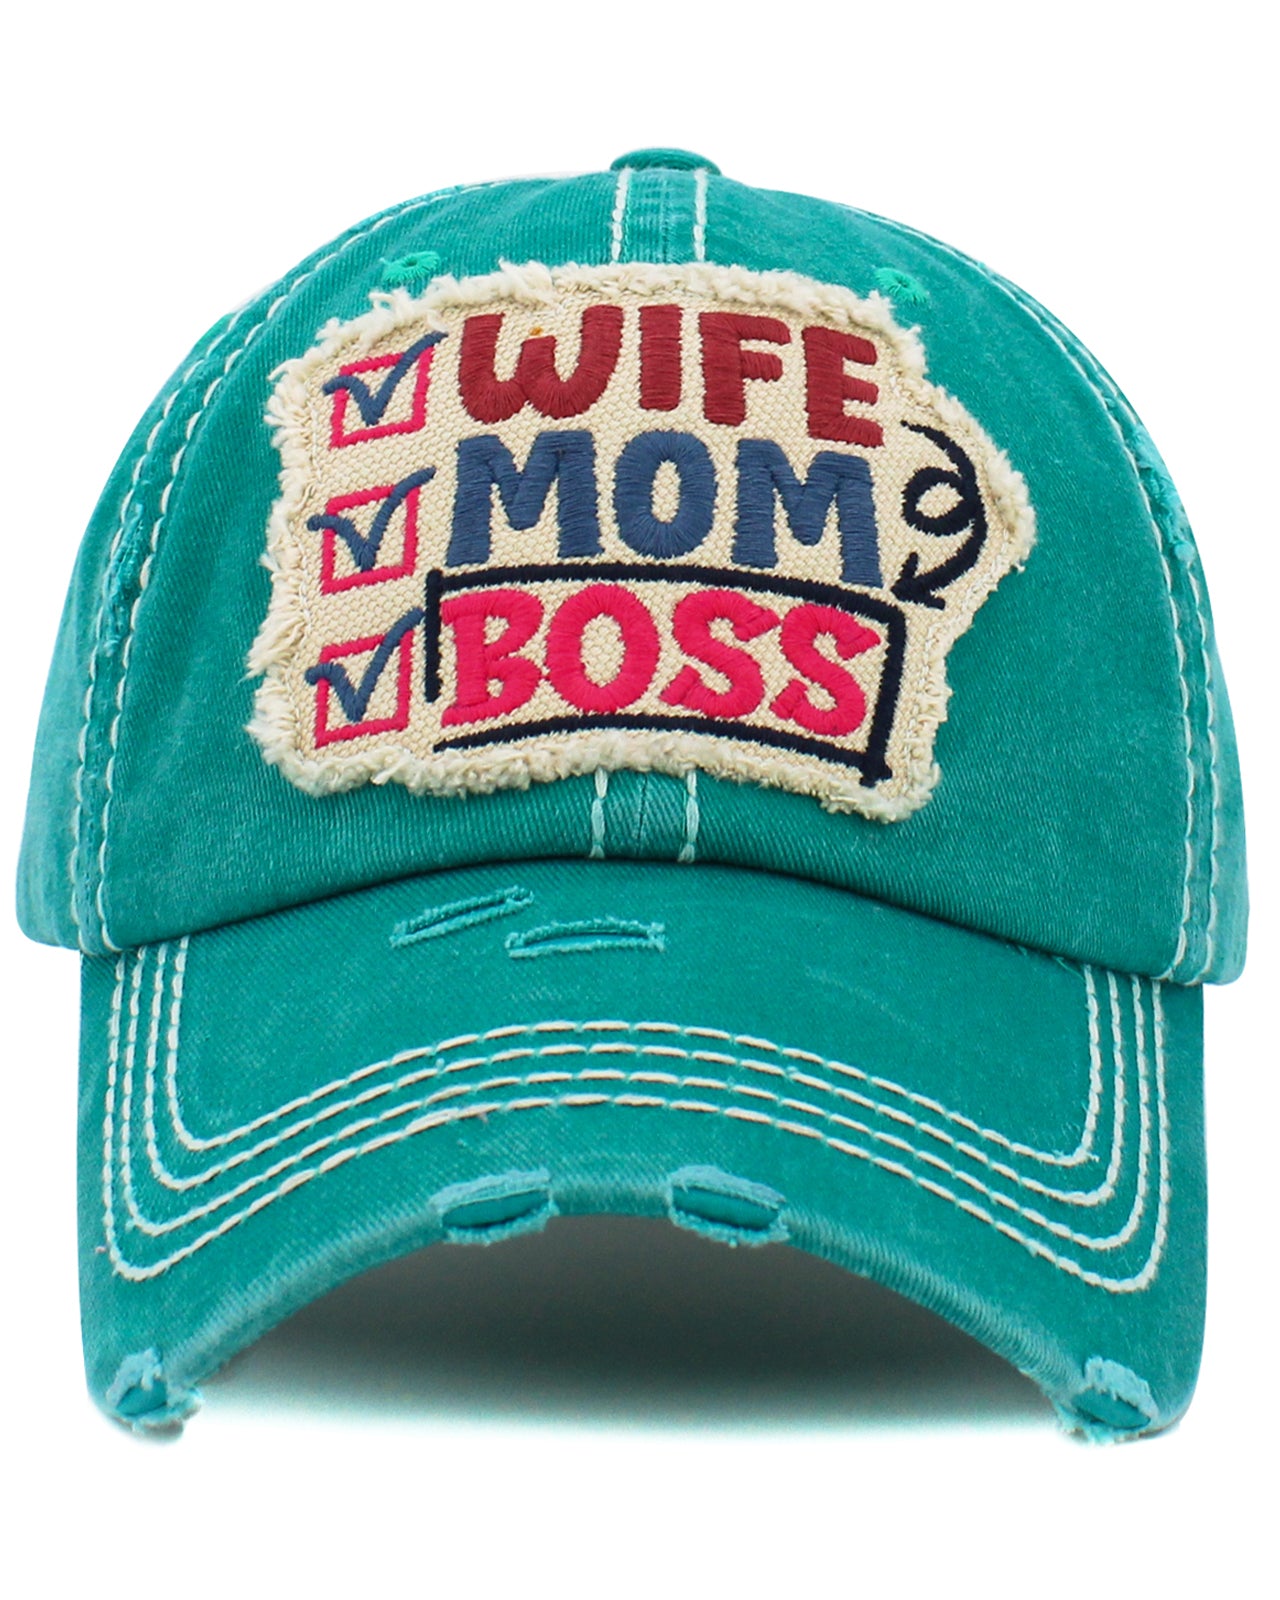 Wife Mom Boss Hat - Turquoise